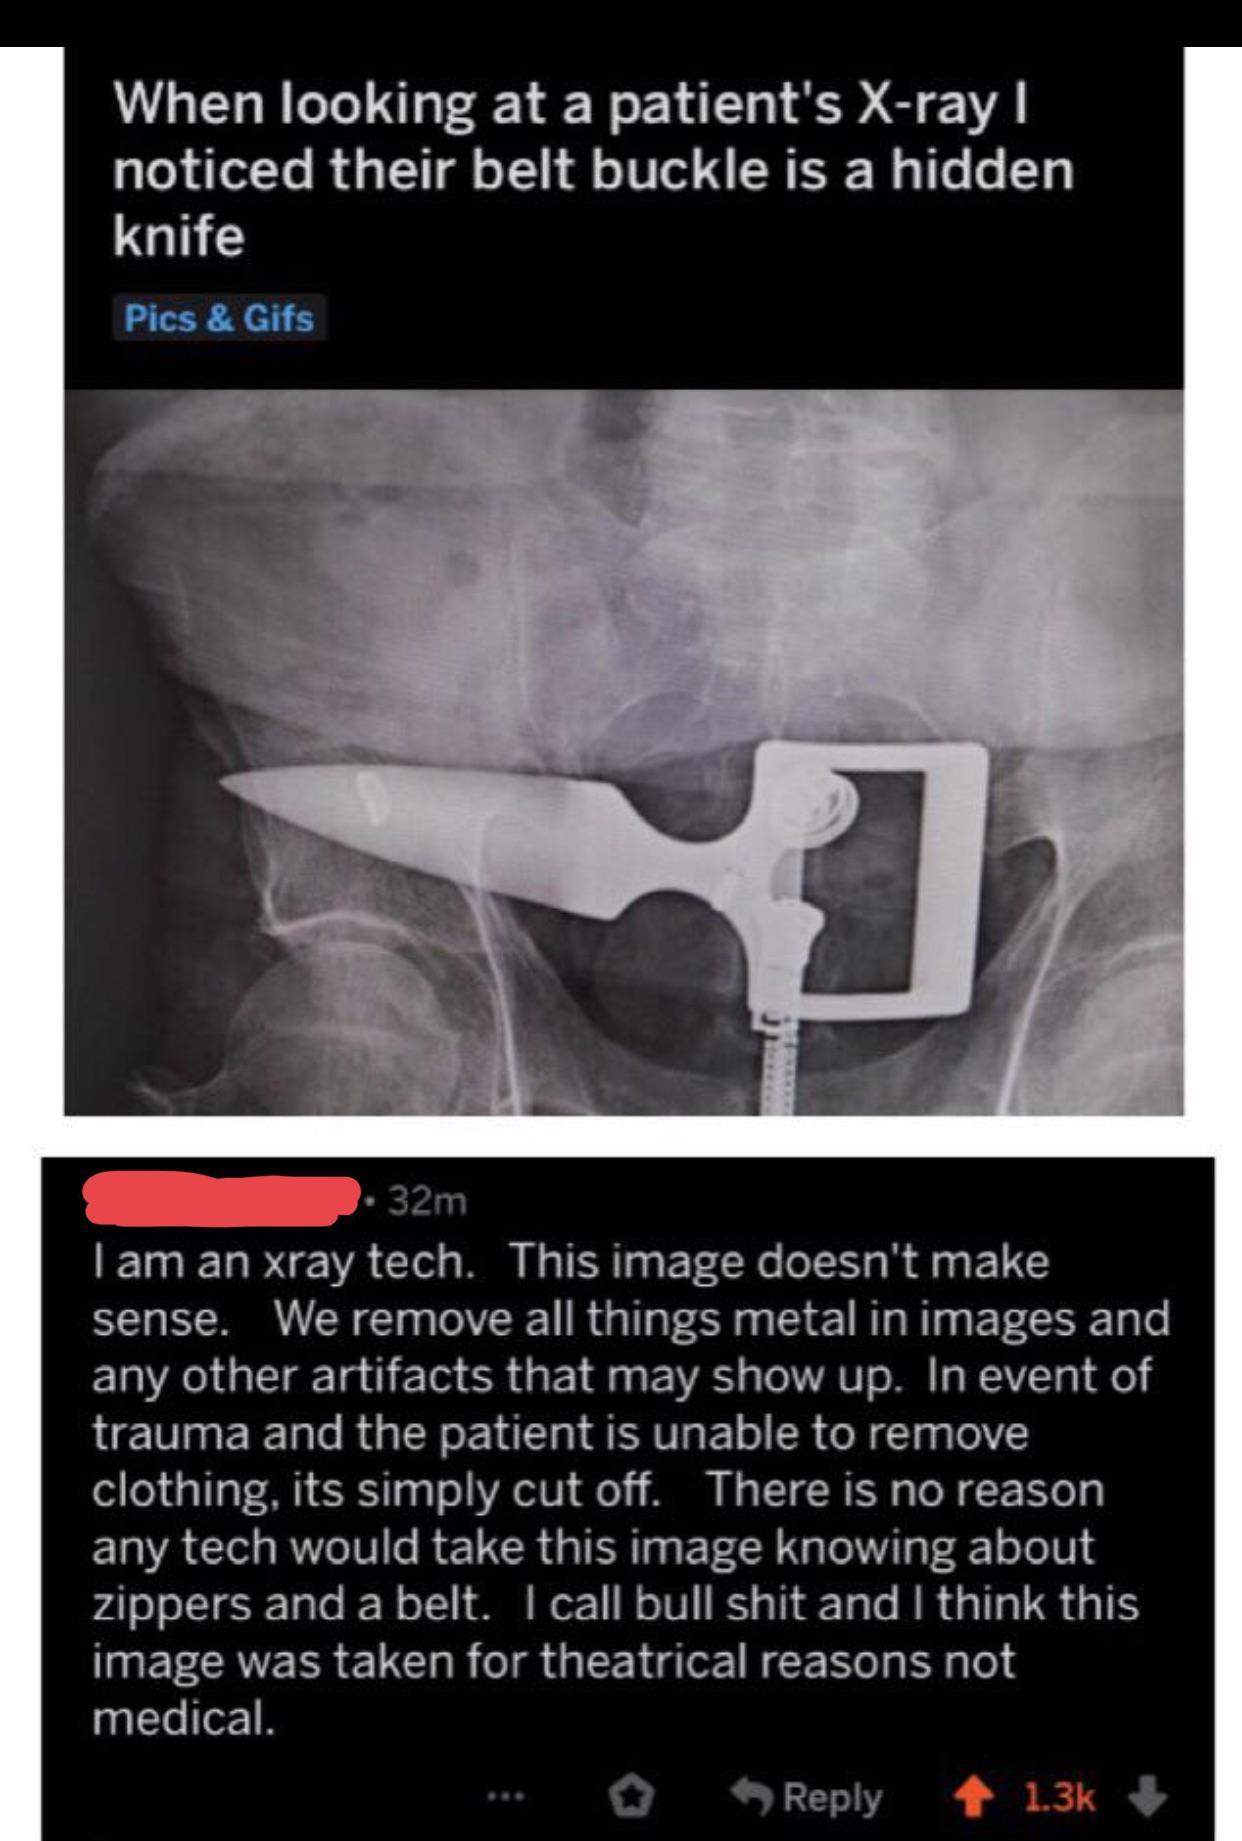 social media liars - When looking at a patient's Xray| noticed their belt buckle is a hidden knife  I am an xray tech. This image doesn't make sense. We remove all things metal in images and any other artifacts that may show up.